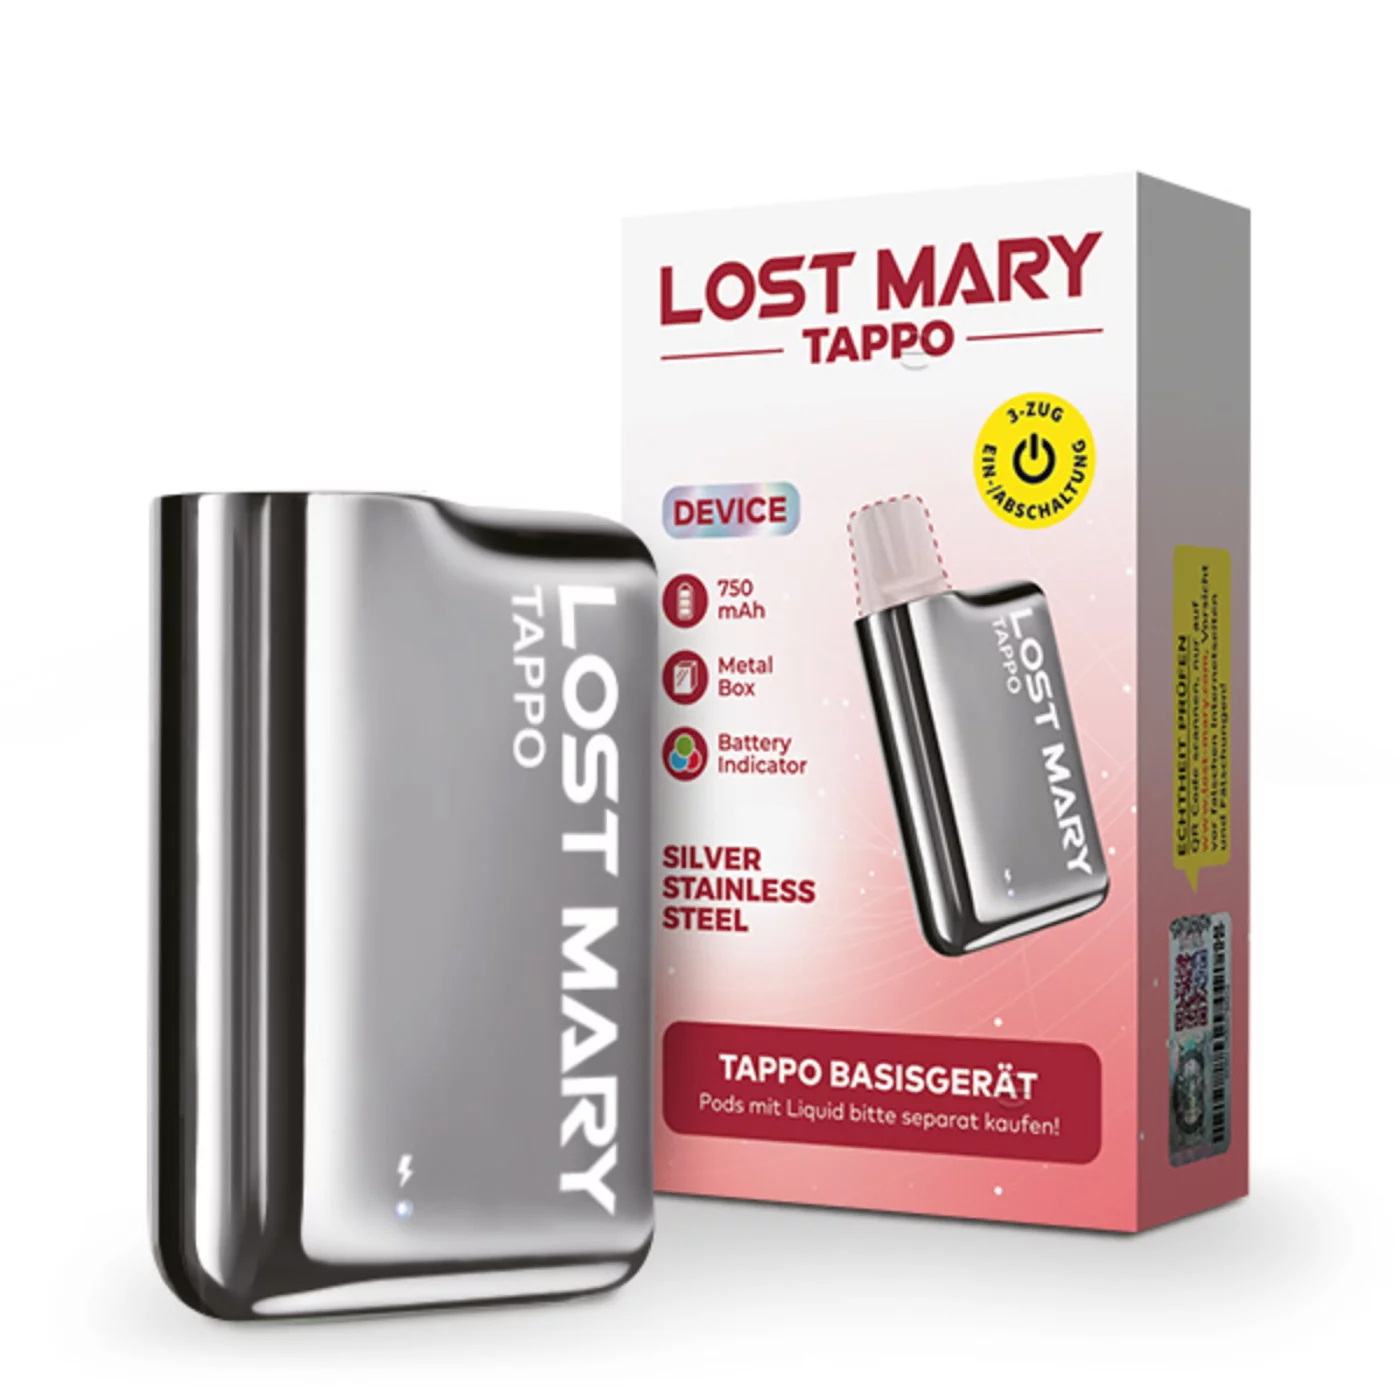 Lost Mary Tappo Pod System - Basisgerät Silver Stainless Steel